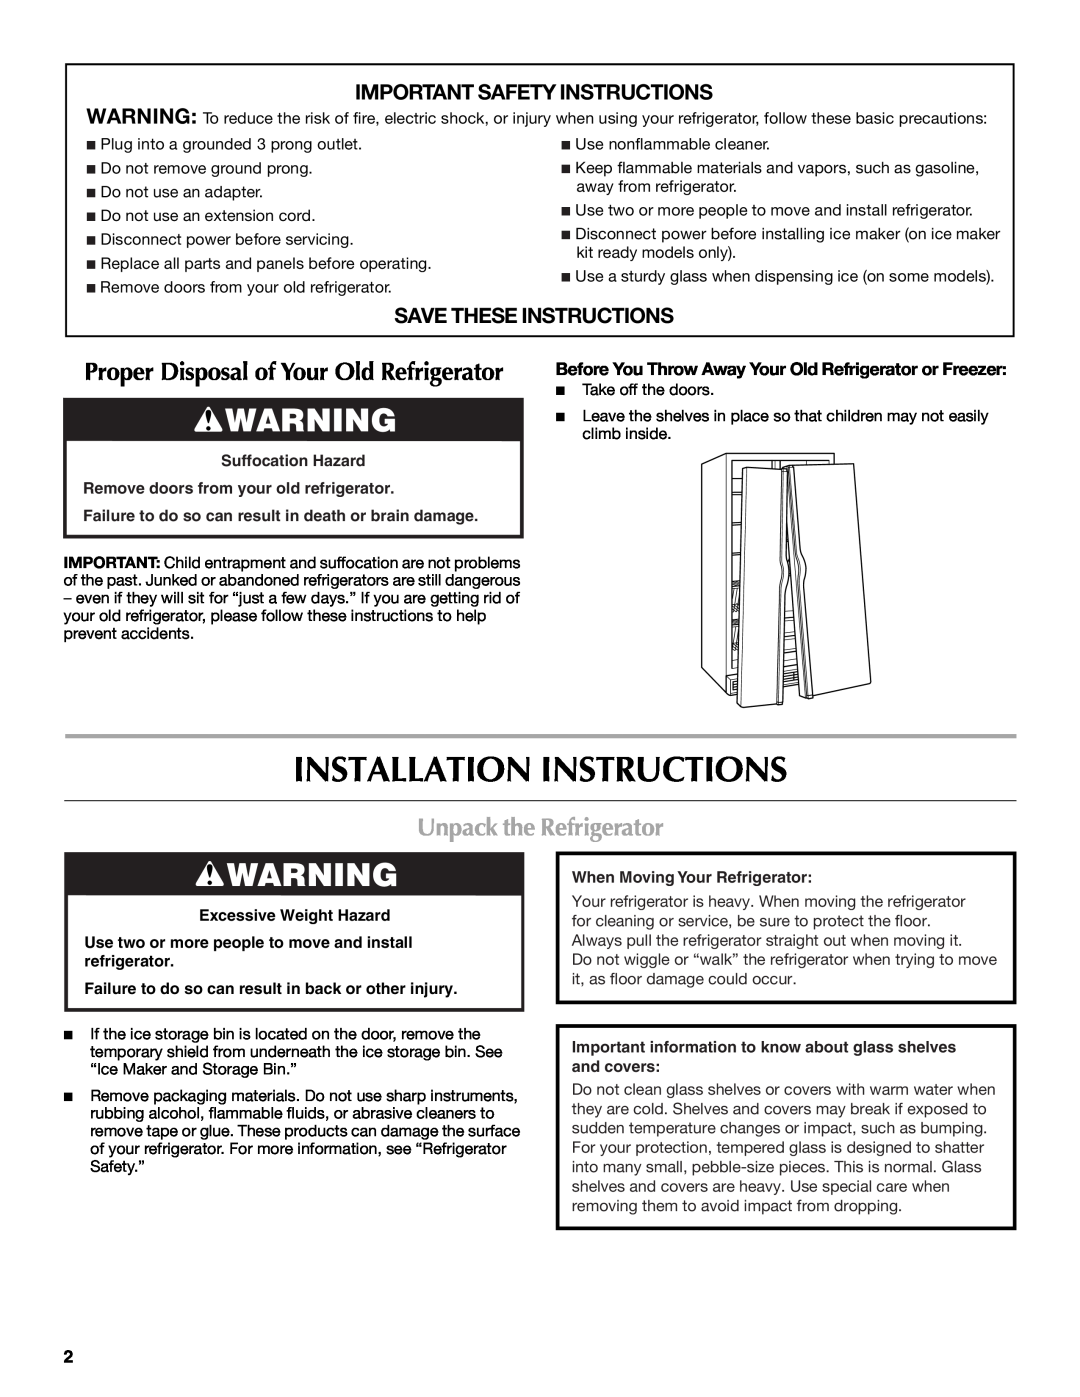 Maytag T1WG2 Installation Instructions, Unpack the Refrigerator, Important Safety Instructions, Save These Instructions 